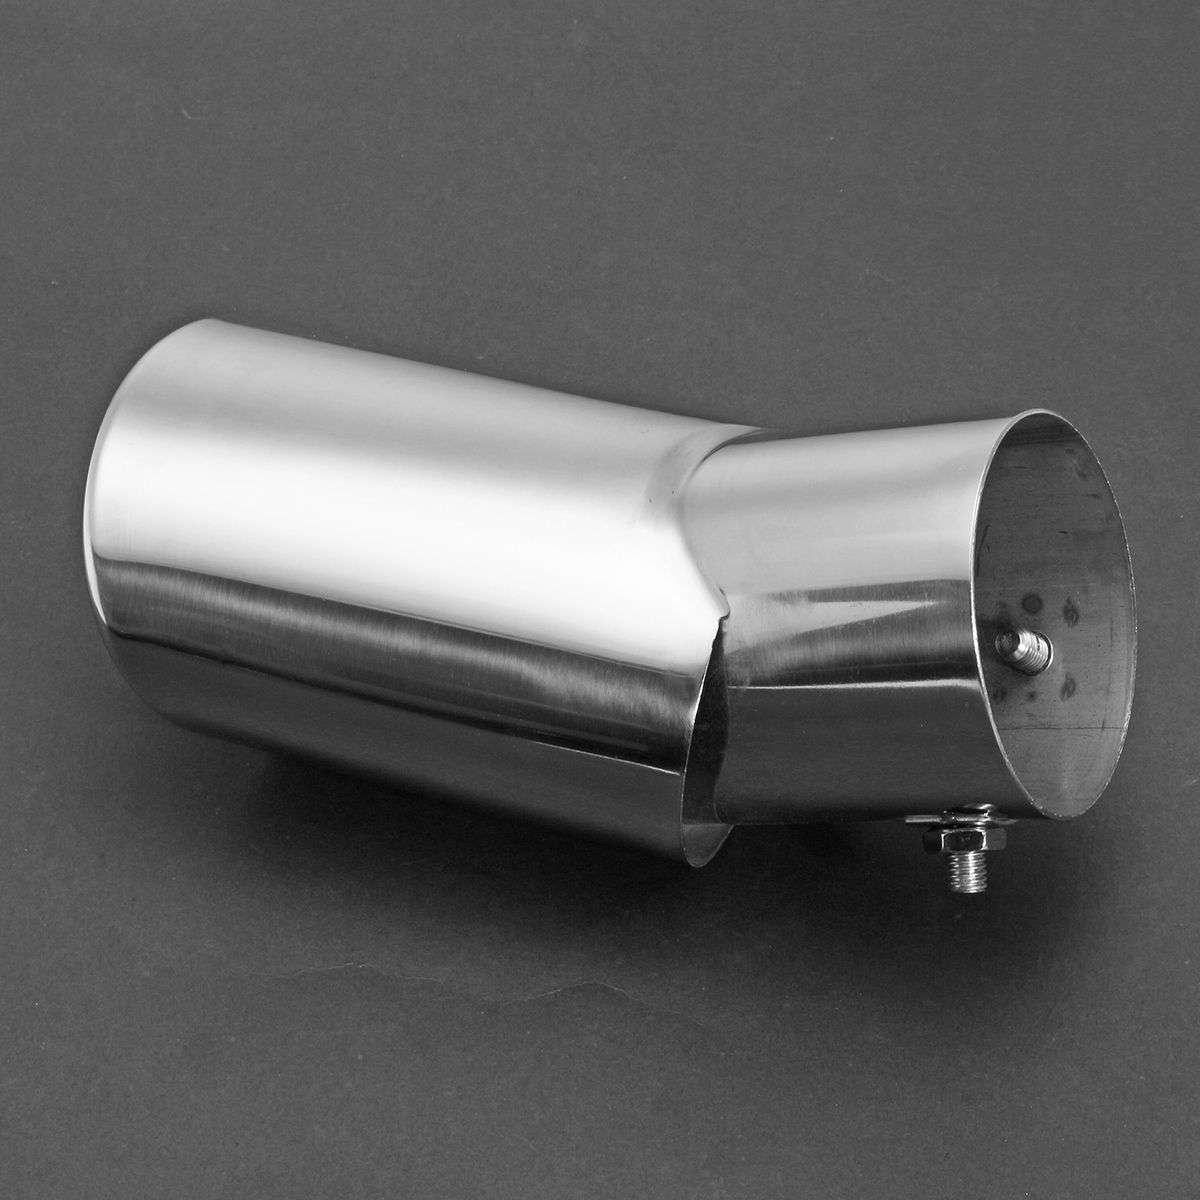 Original-Stainless-End-Tip-Pipe-Exhaust-Muffler-Pipe-For-Subaru-Outback-2015-18-1713047